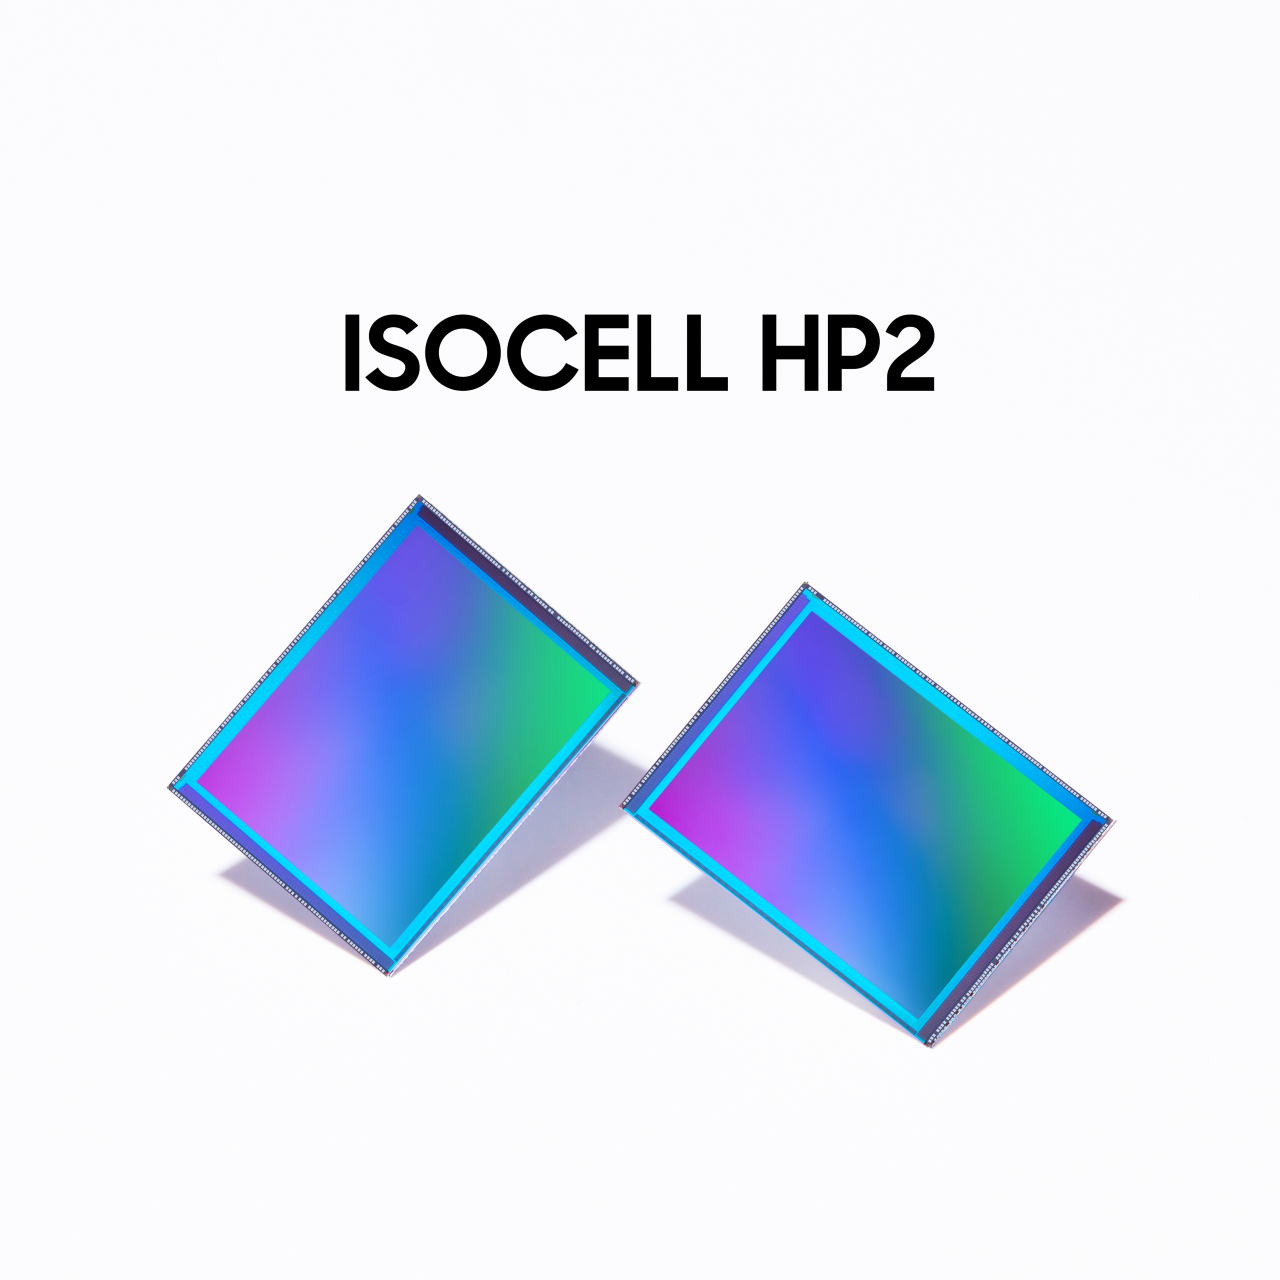 Samsung ISOCELL HP2 (Samsung Electronics)